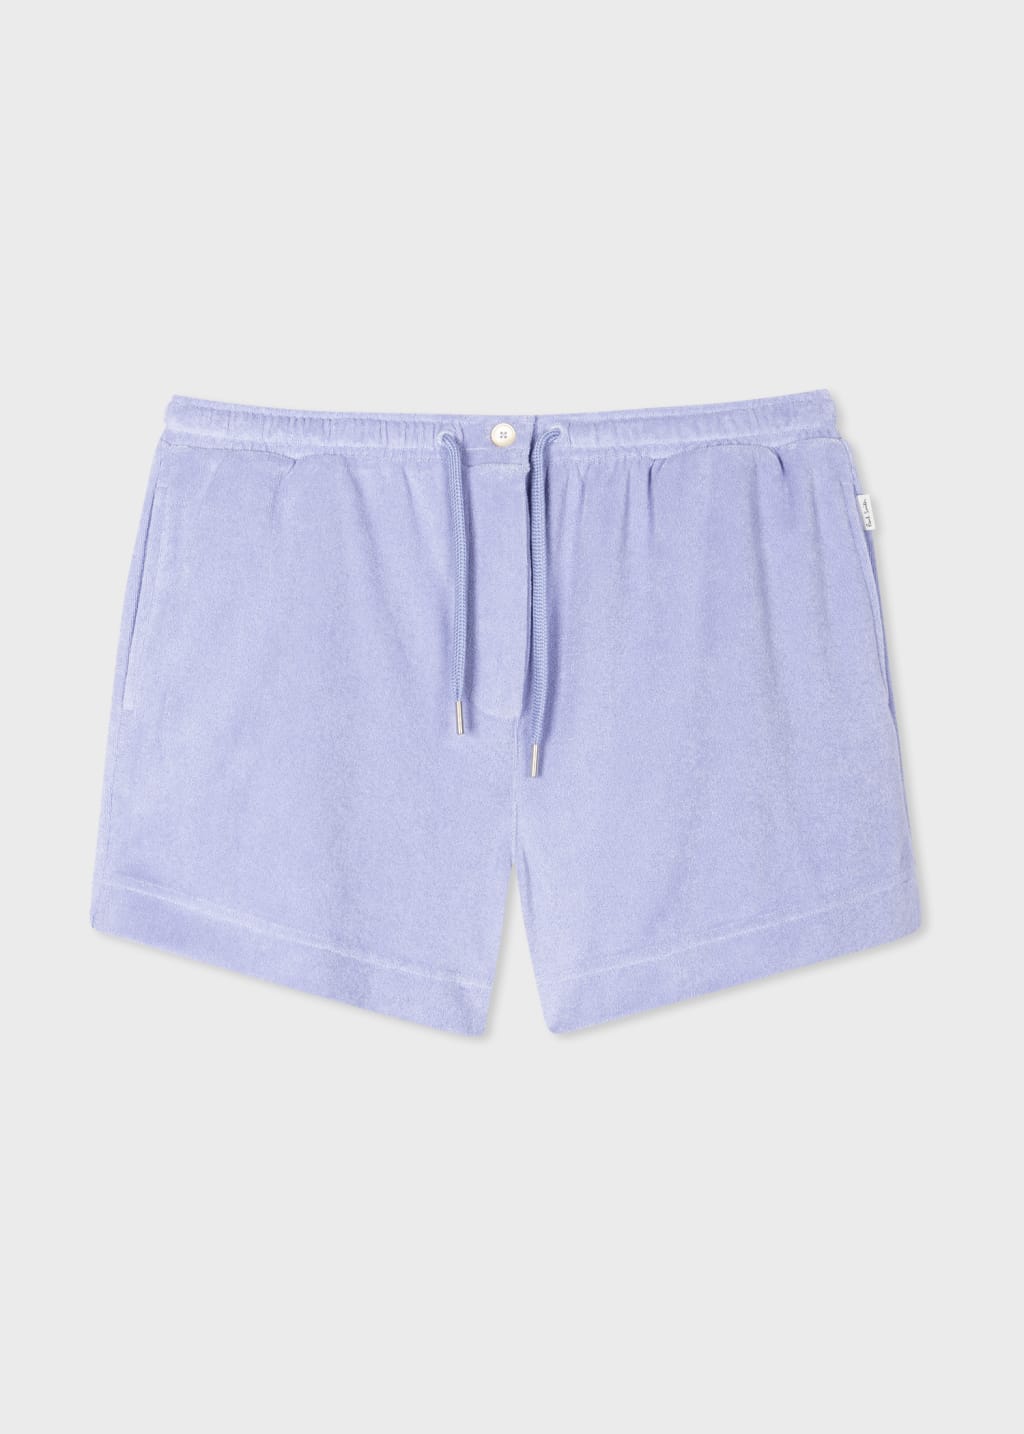 Front View - Women's Cornflower Blue Towelling Shorts Paul Smith